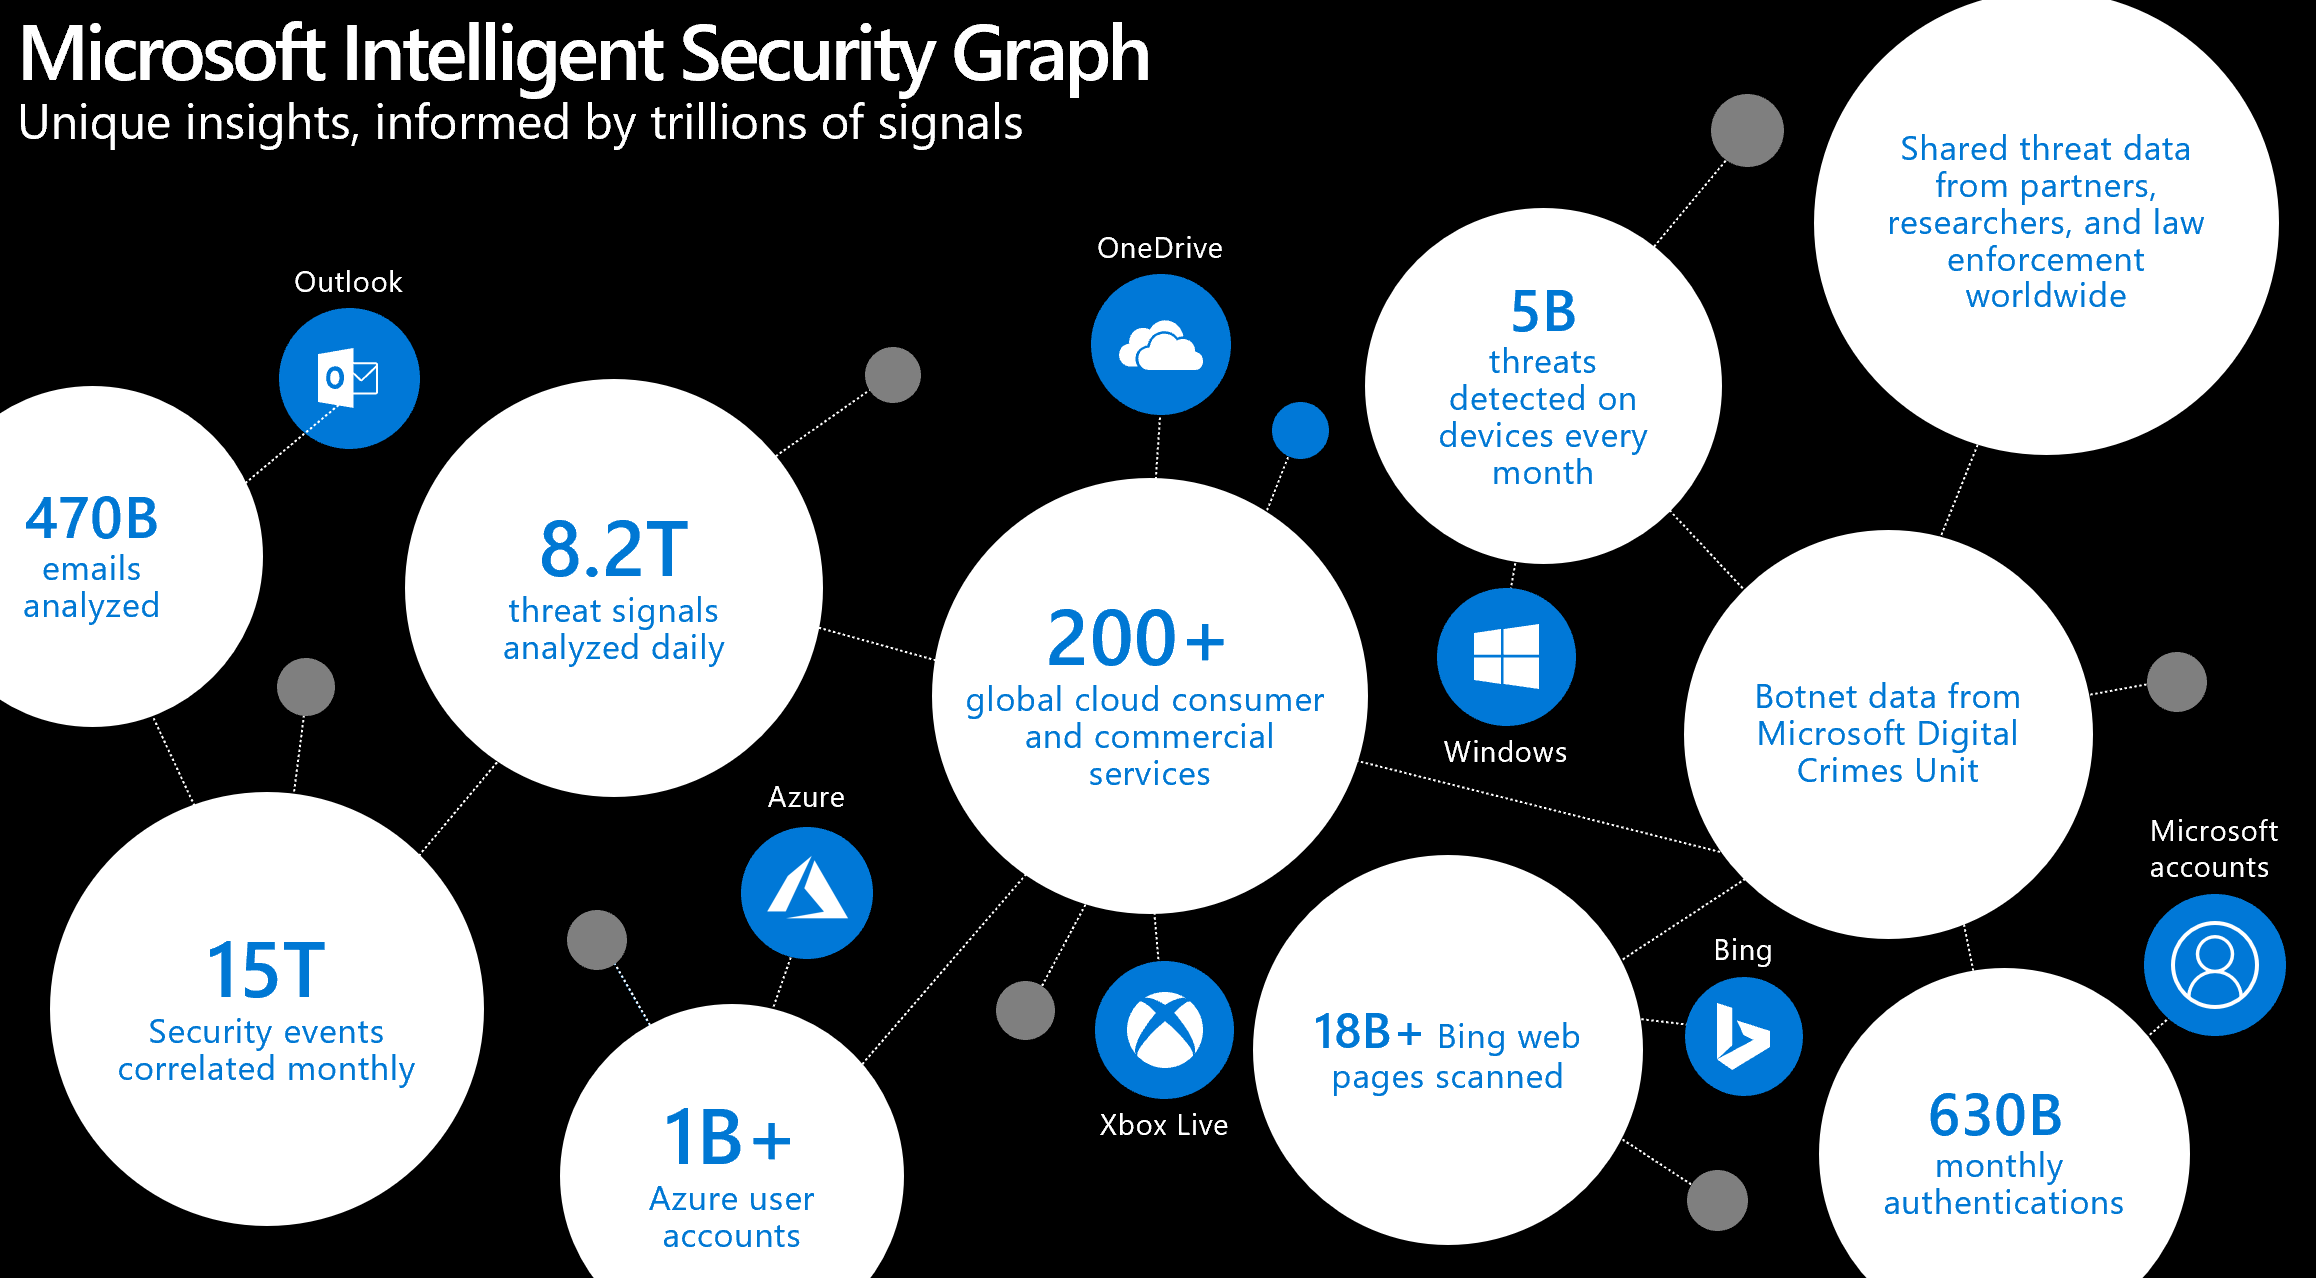 Infographic showing the Microsoft Intelligent Security Graph: unique insights, informed by trillions of signals from Outlook, OneDrive, Windows, Bing, Xbox Live, Azure, and Microsoft accounts.